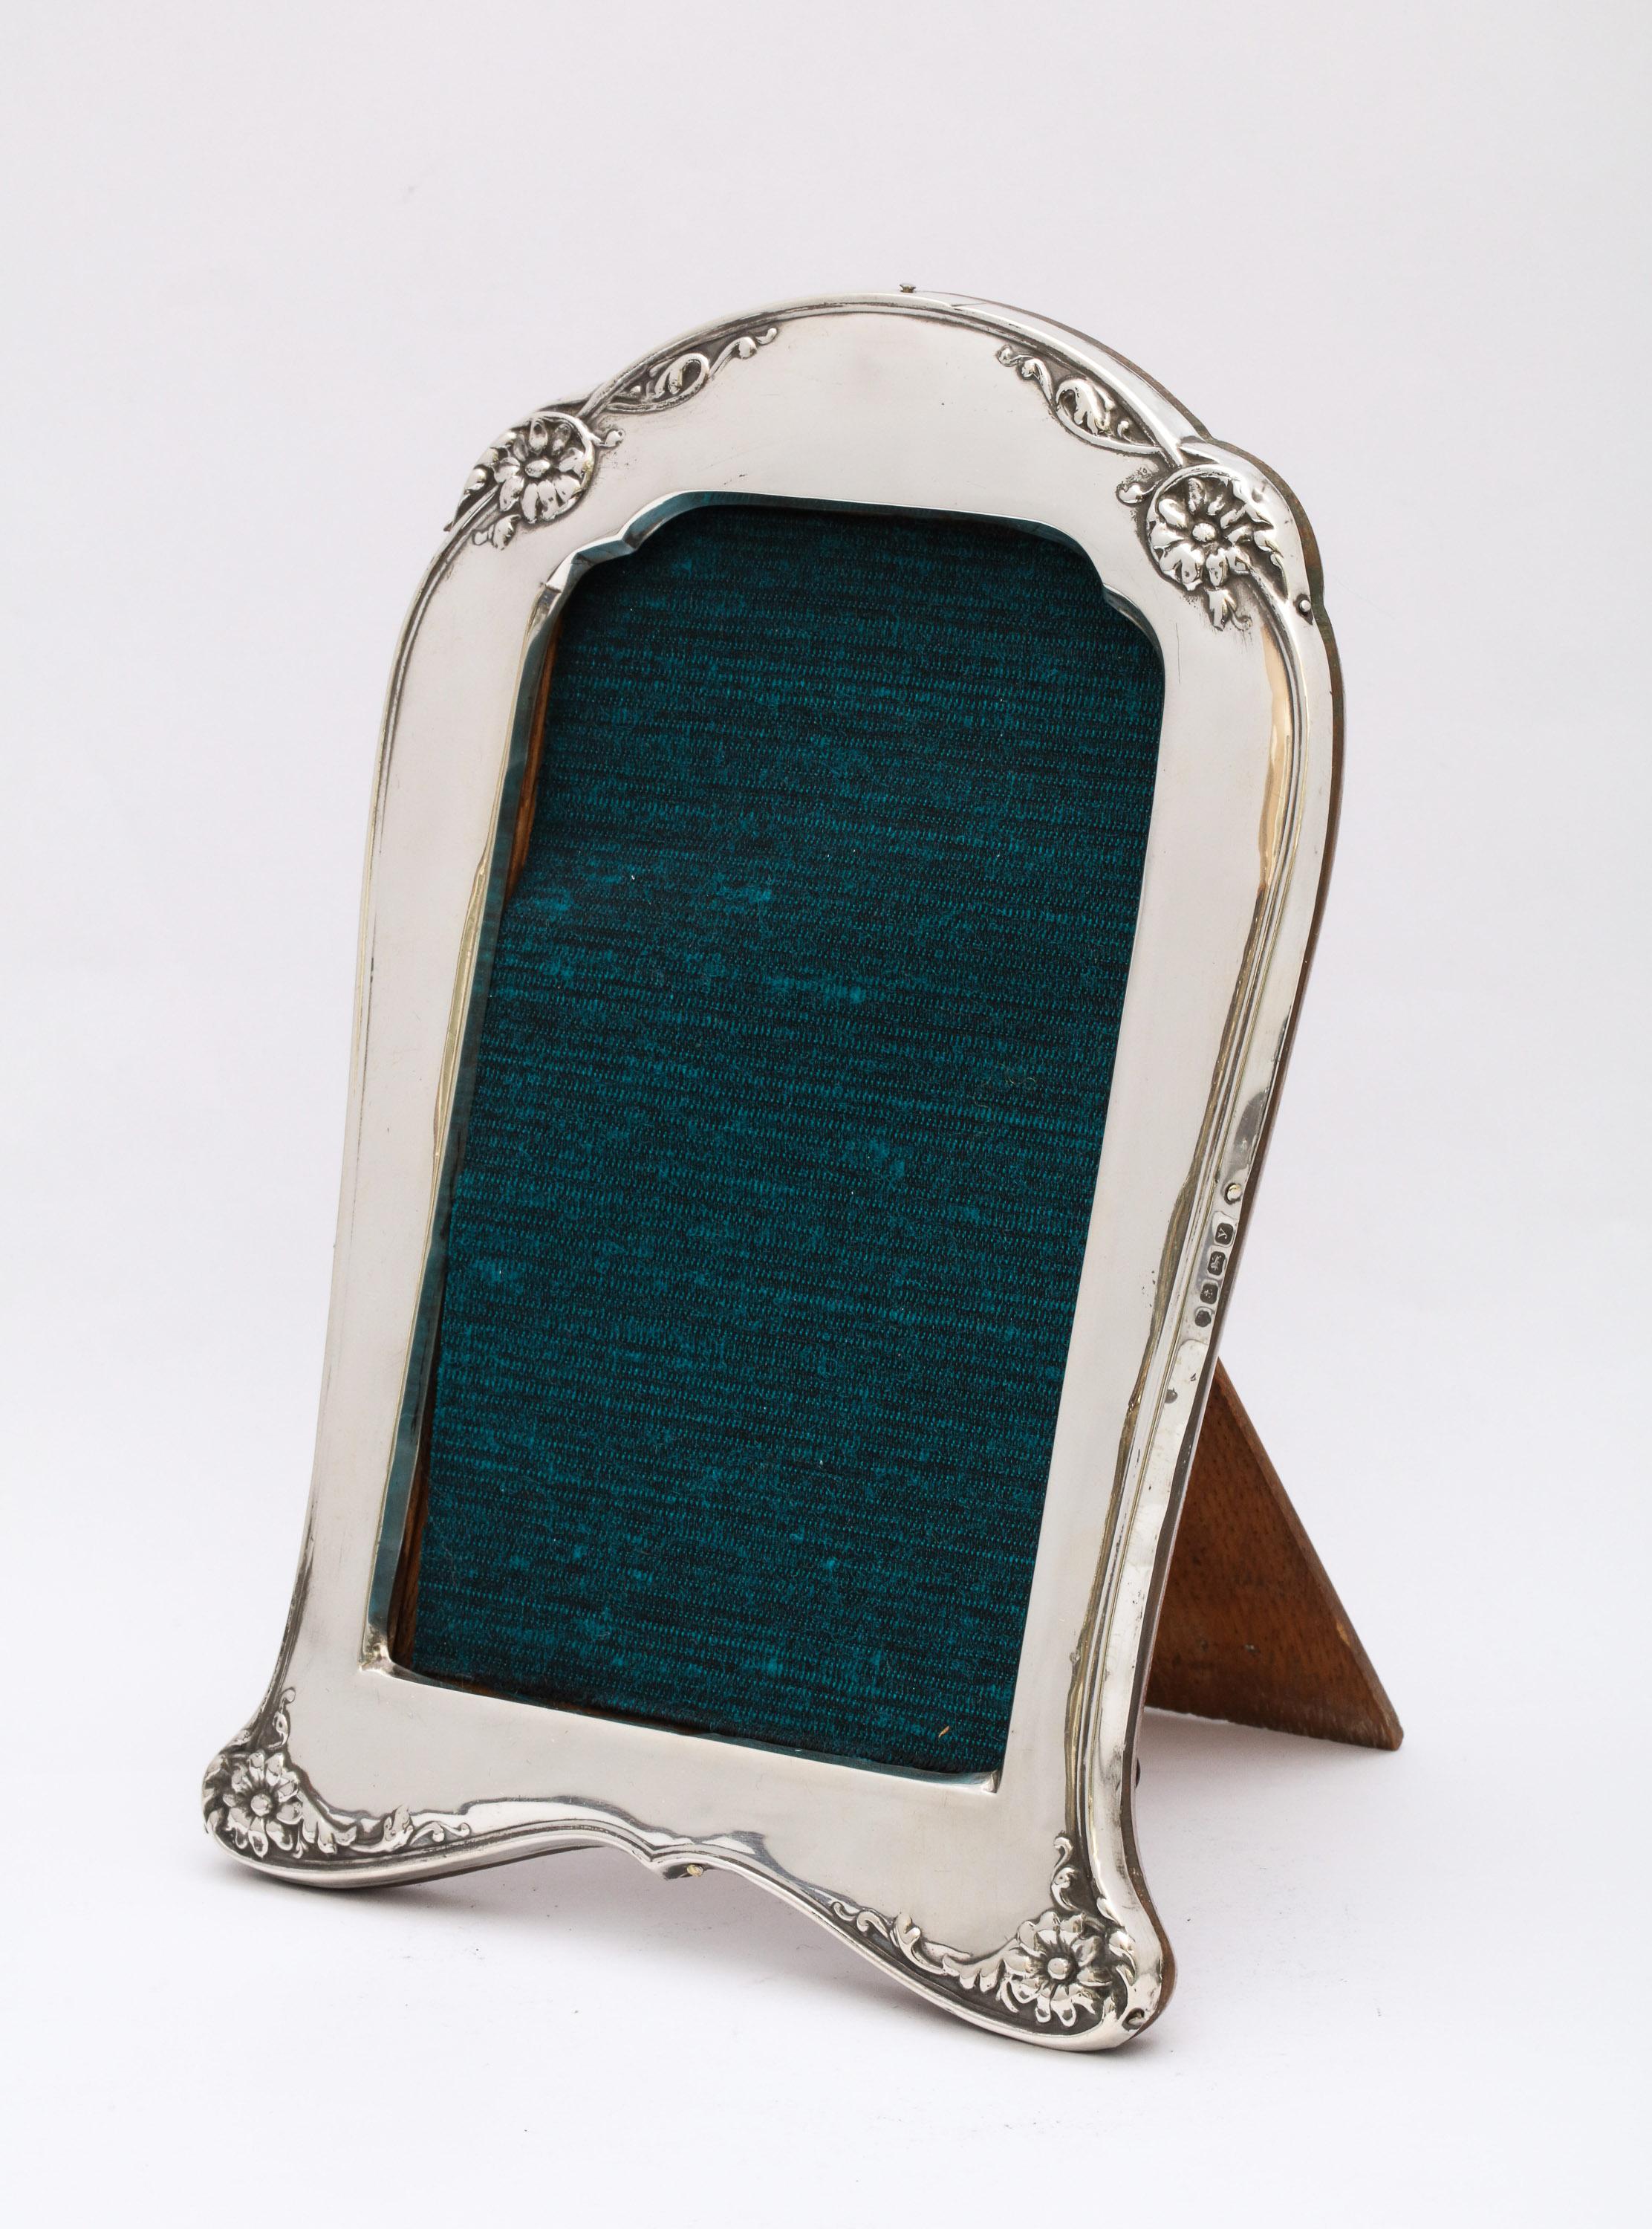 Art Deco, sterling silver, footed, wood-backed picture frame with floral decoration, Birmingham, England, 1923, Charles S. Green and Company - makers. Measures 7 1/2 inches high (at highest point) x 5 1/2 inches wide (at widest point) x 4 1/2 inches